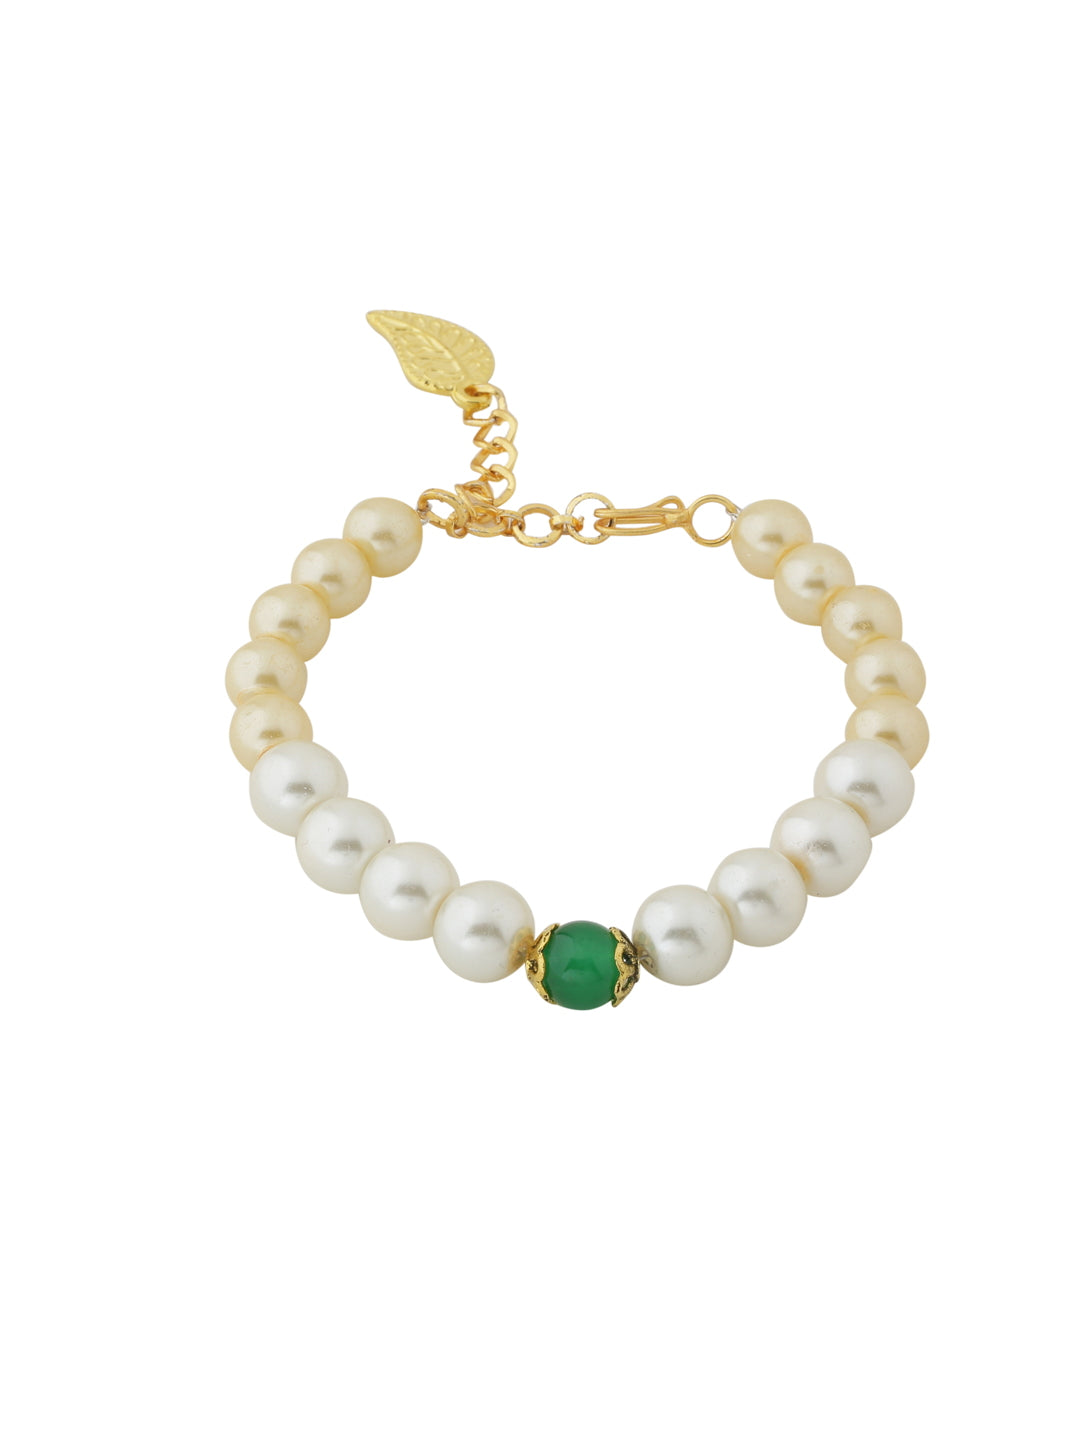 Green and White Pearl Necklace Set with Bracelet-Viraasi